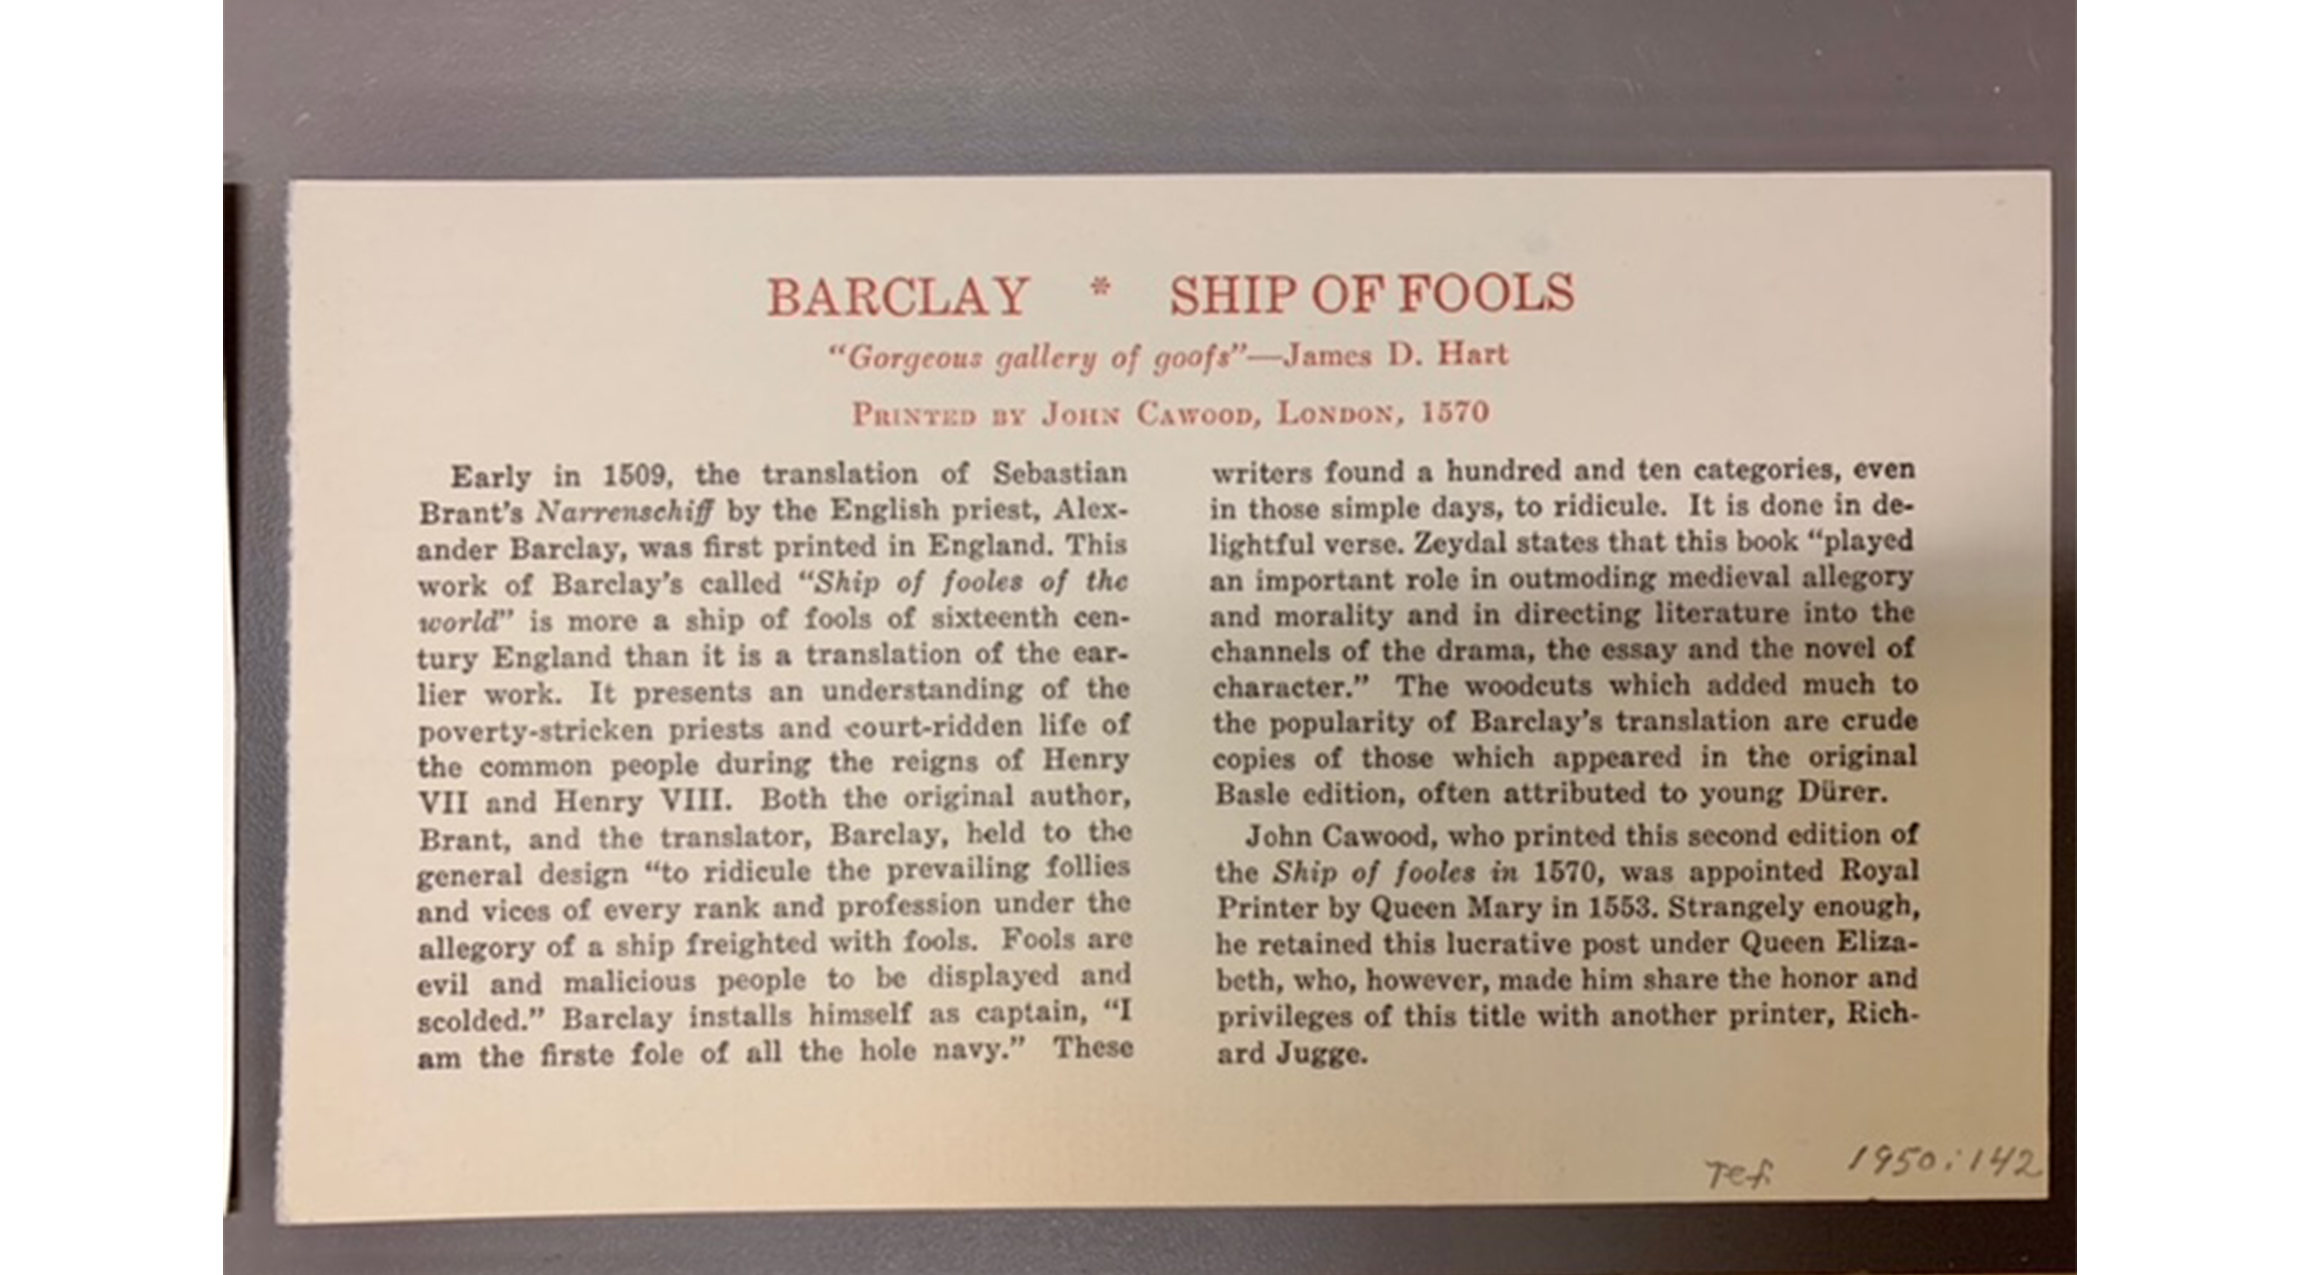 a block of text describing a page from Barclay's "Ship of Fools"